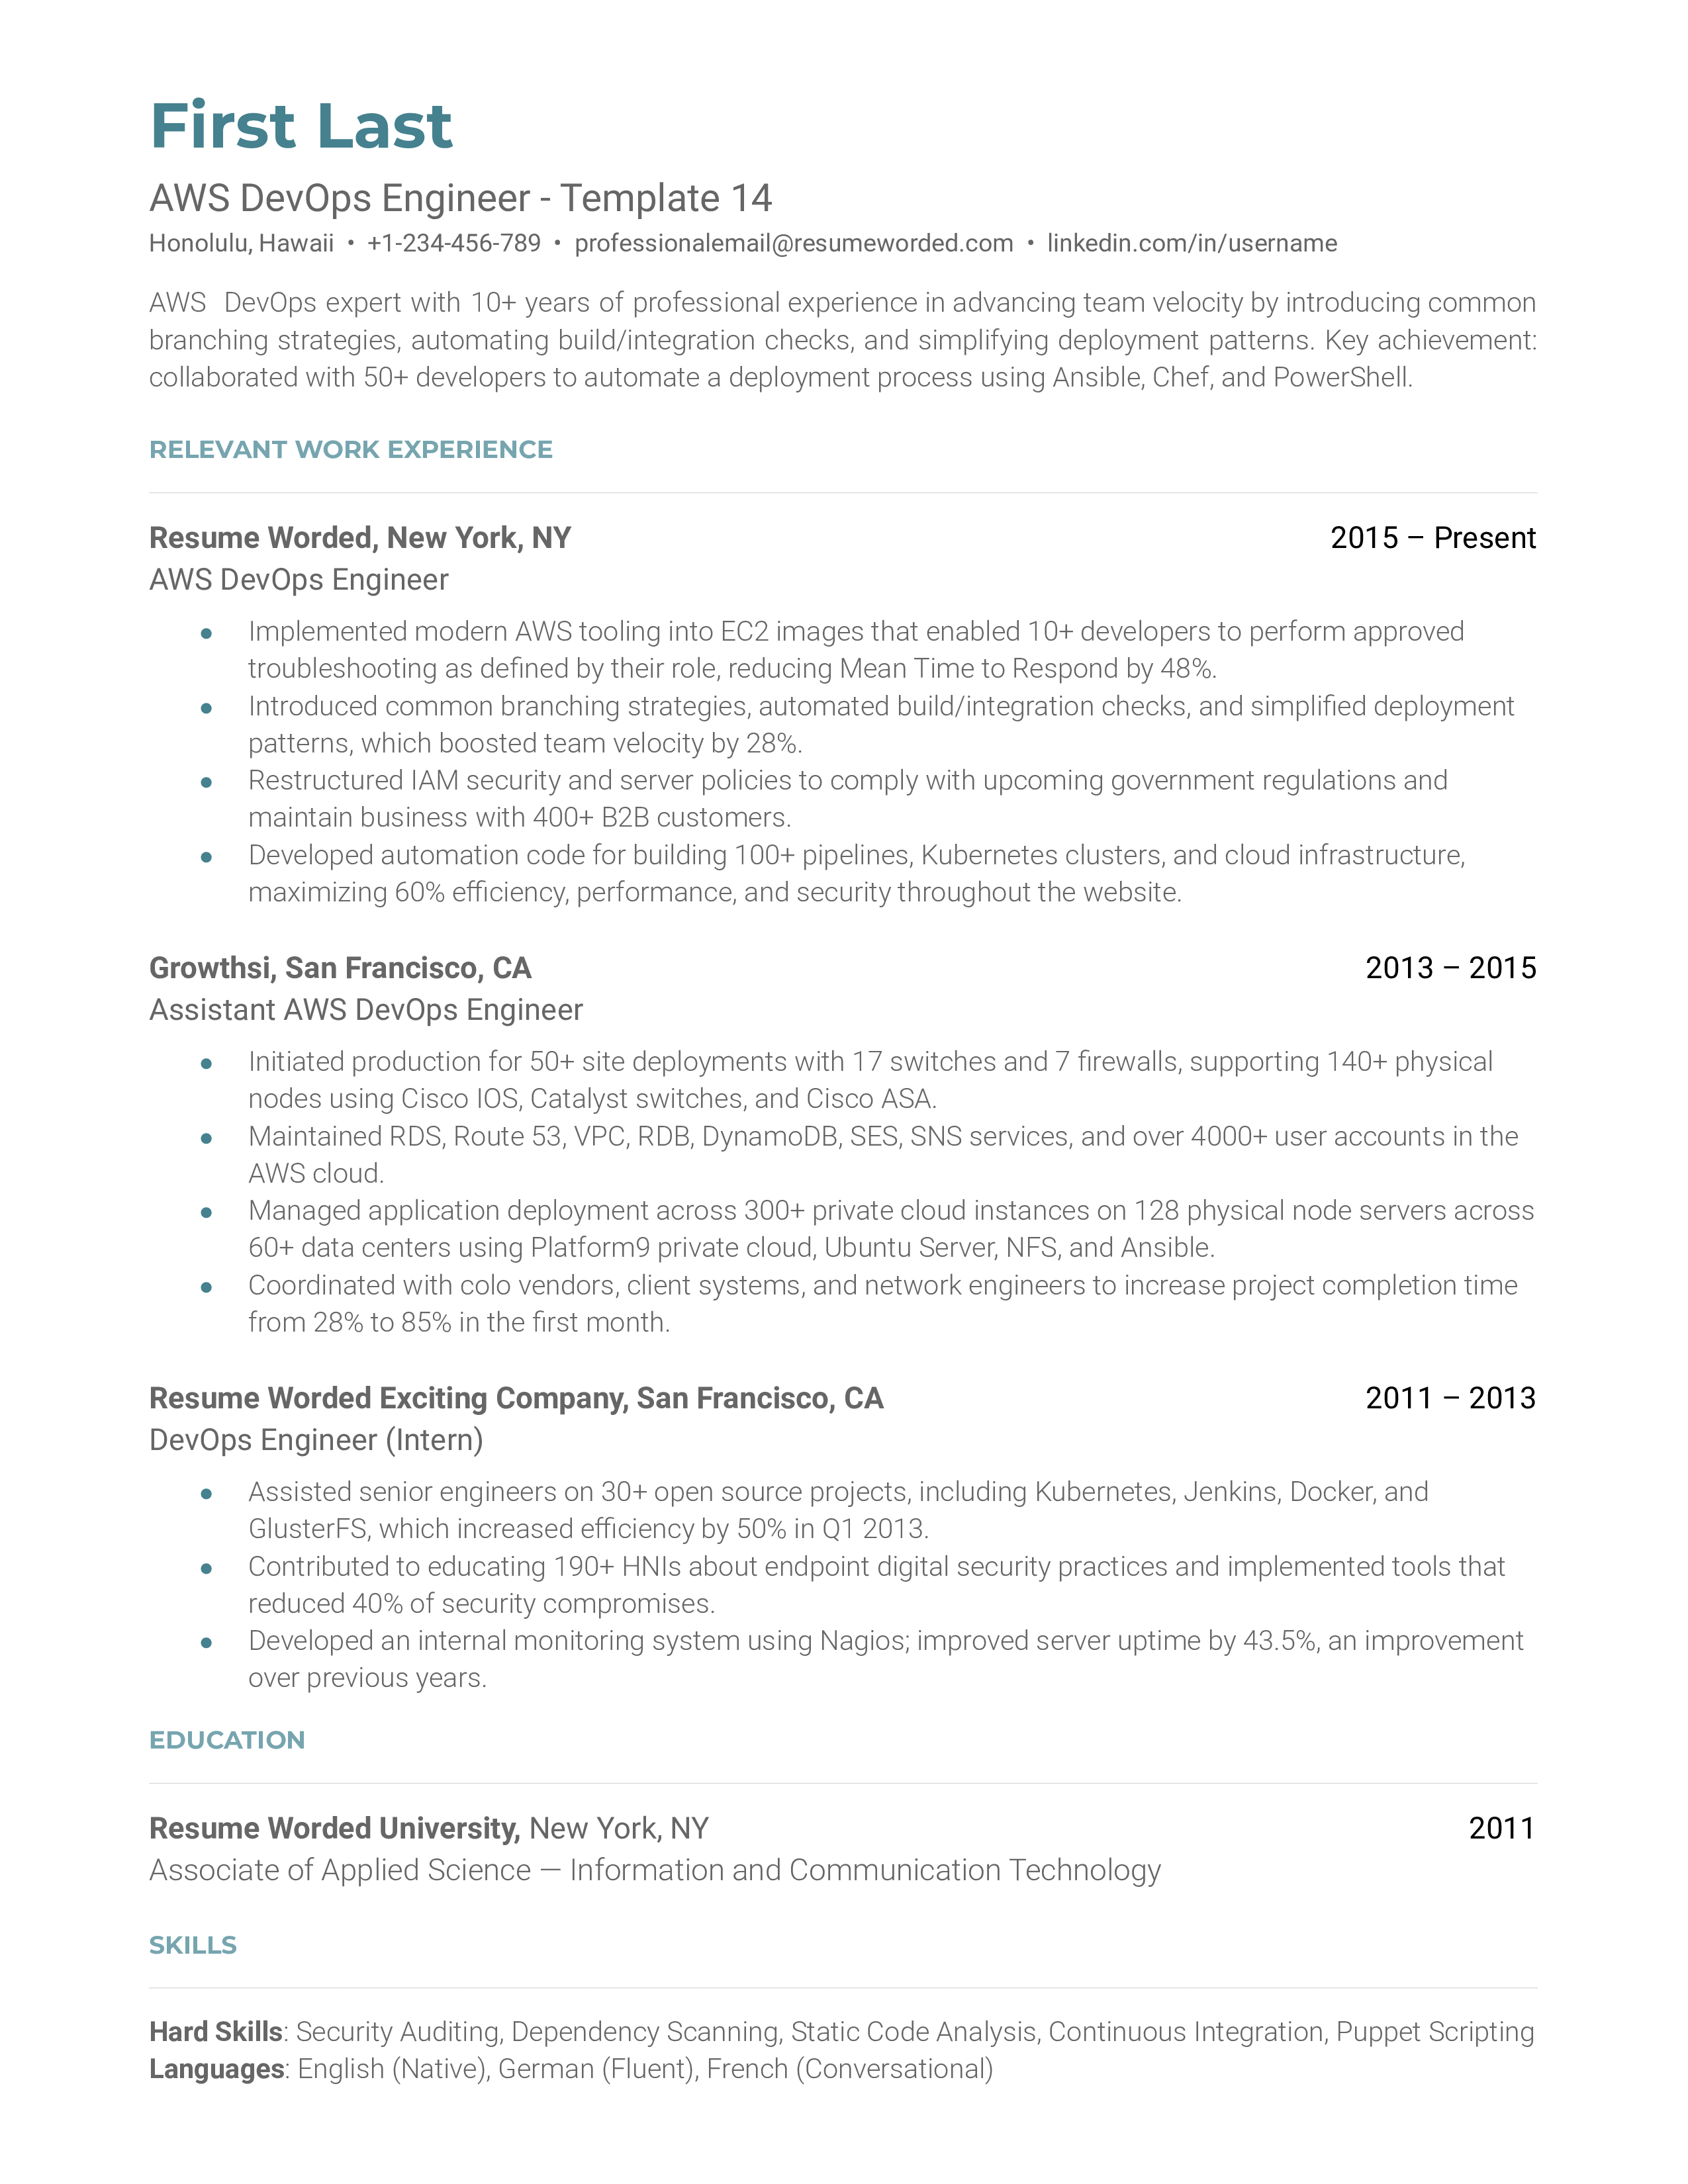 A CV screenshot showcasing AWS DevOps Engineer qualifications and experience.